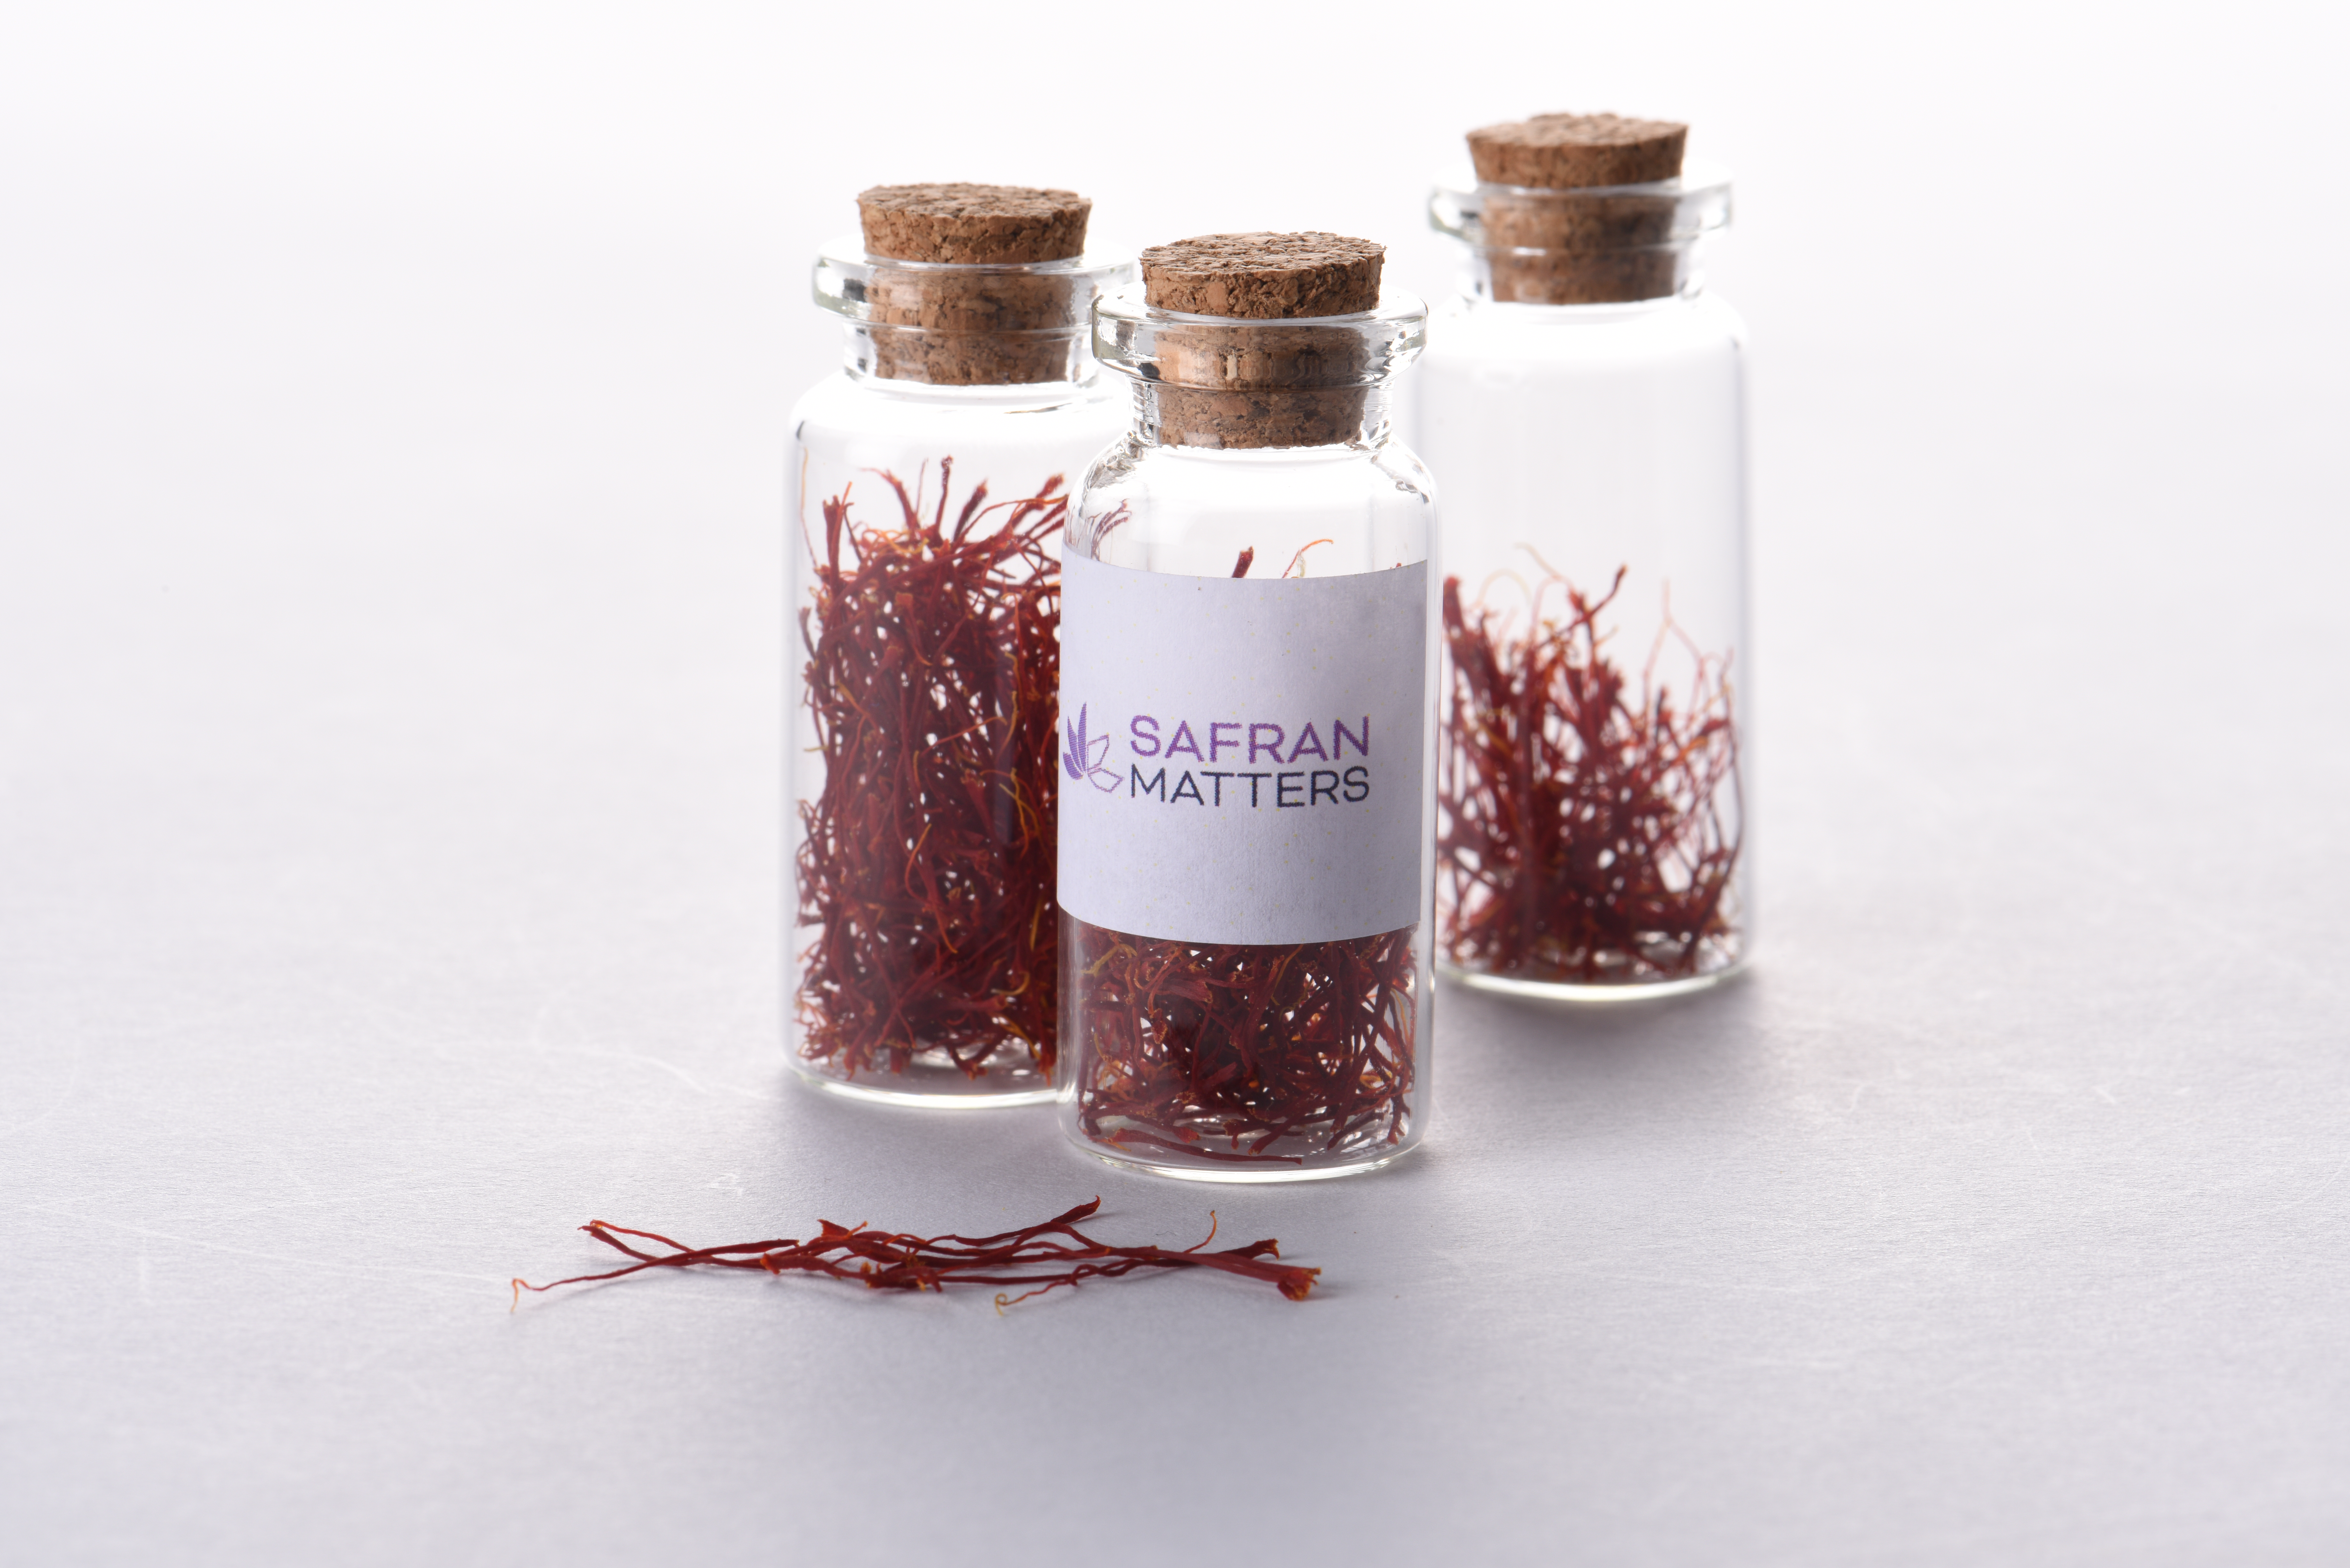 Three small glass bottles with saffron threads, in front of them are also some red saffron threads.